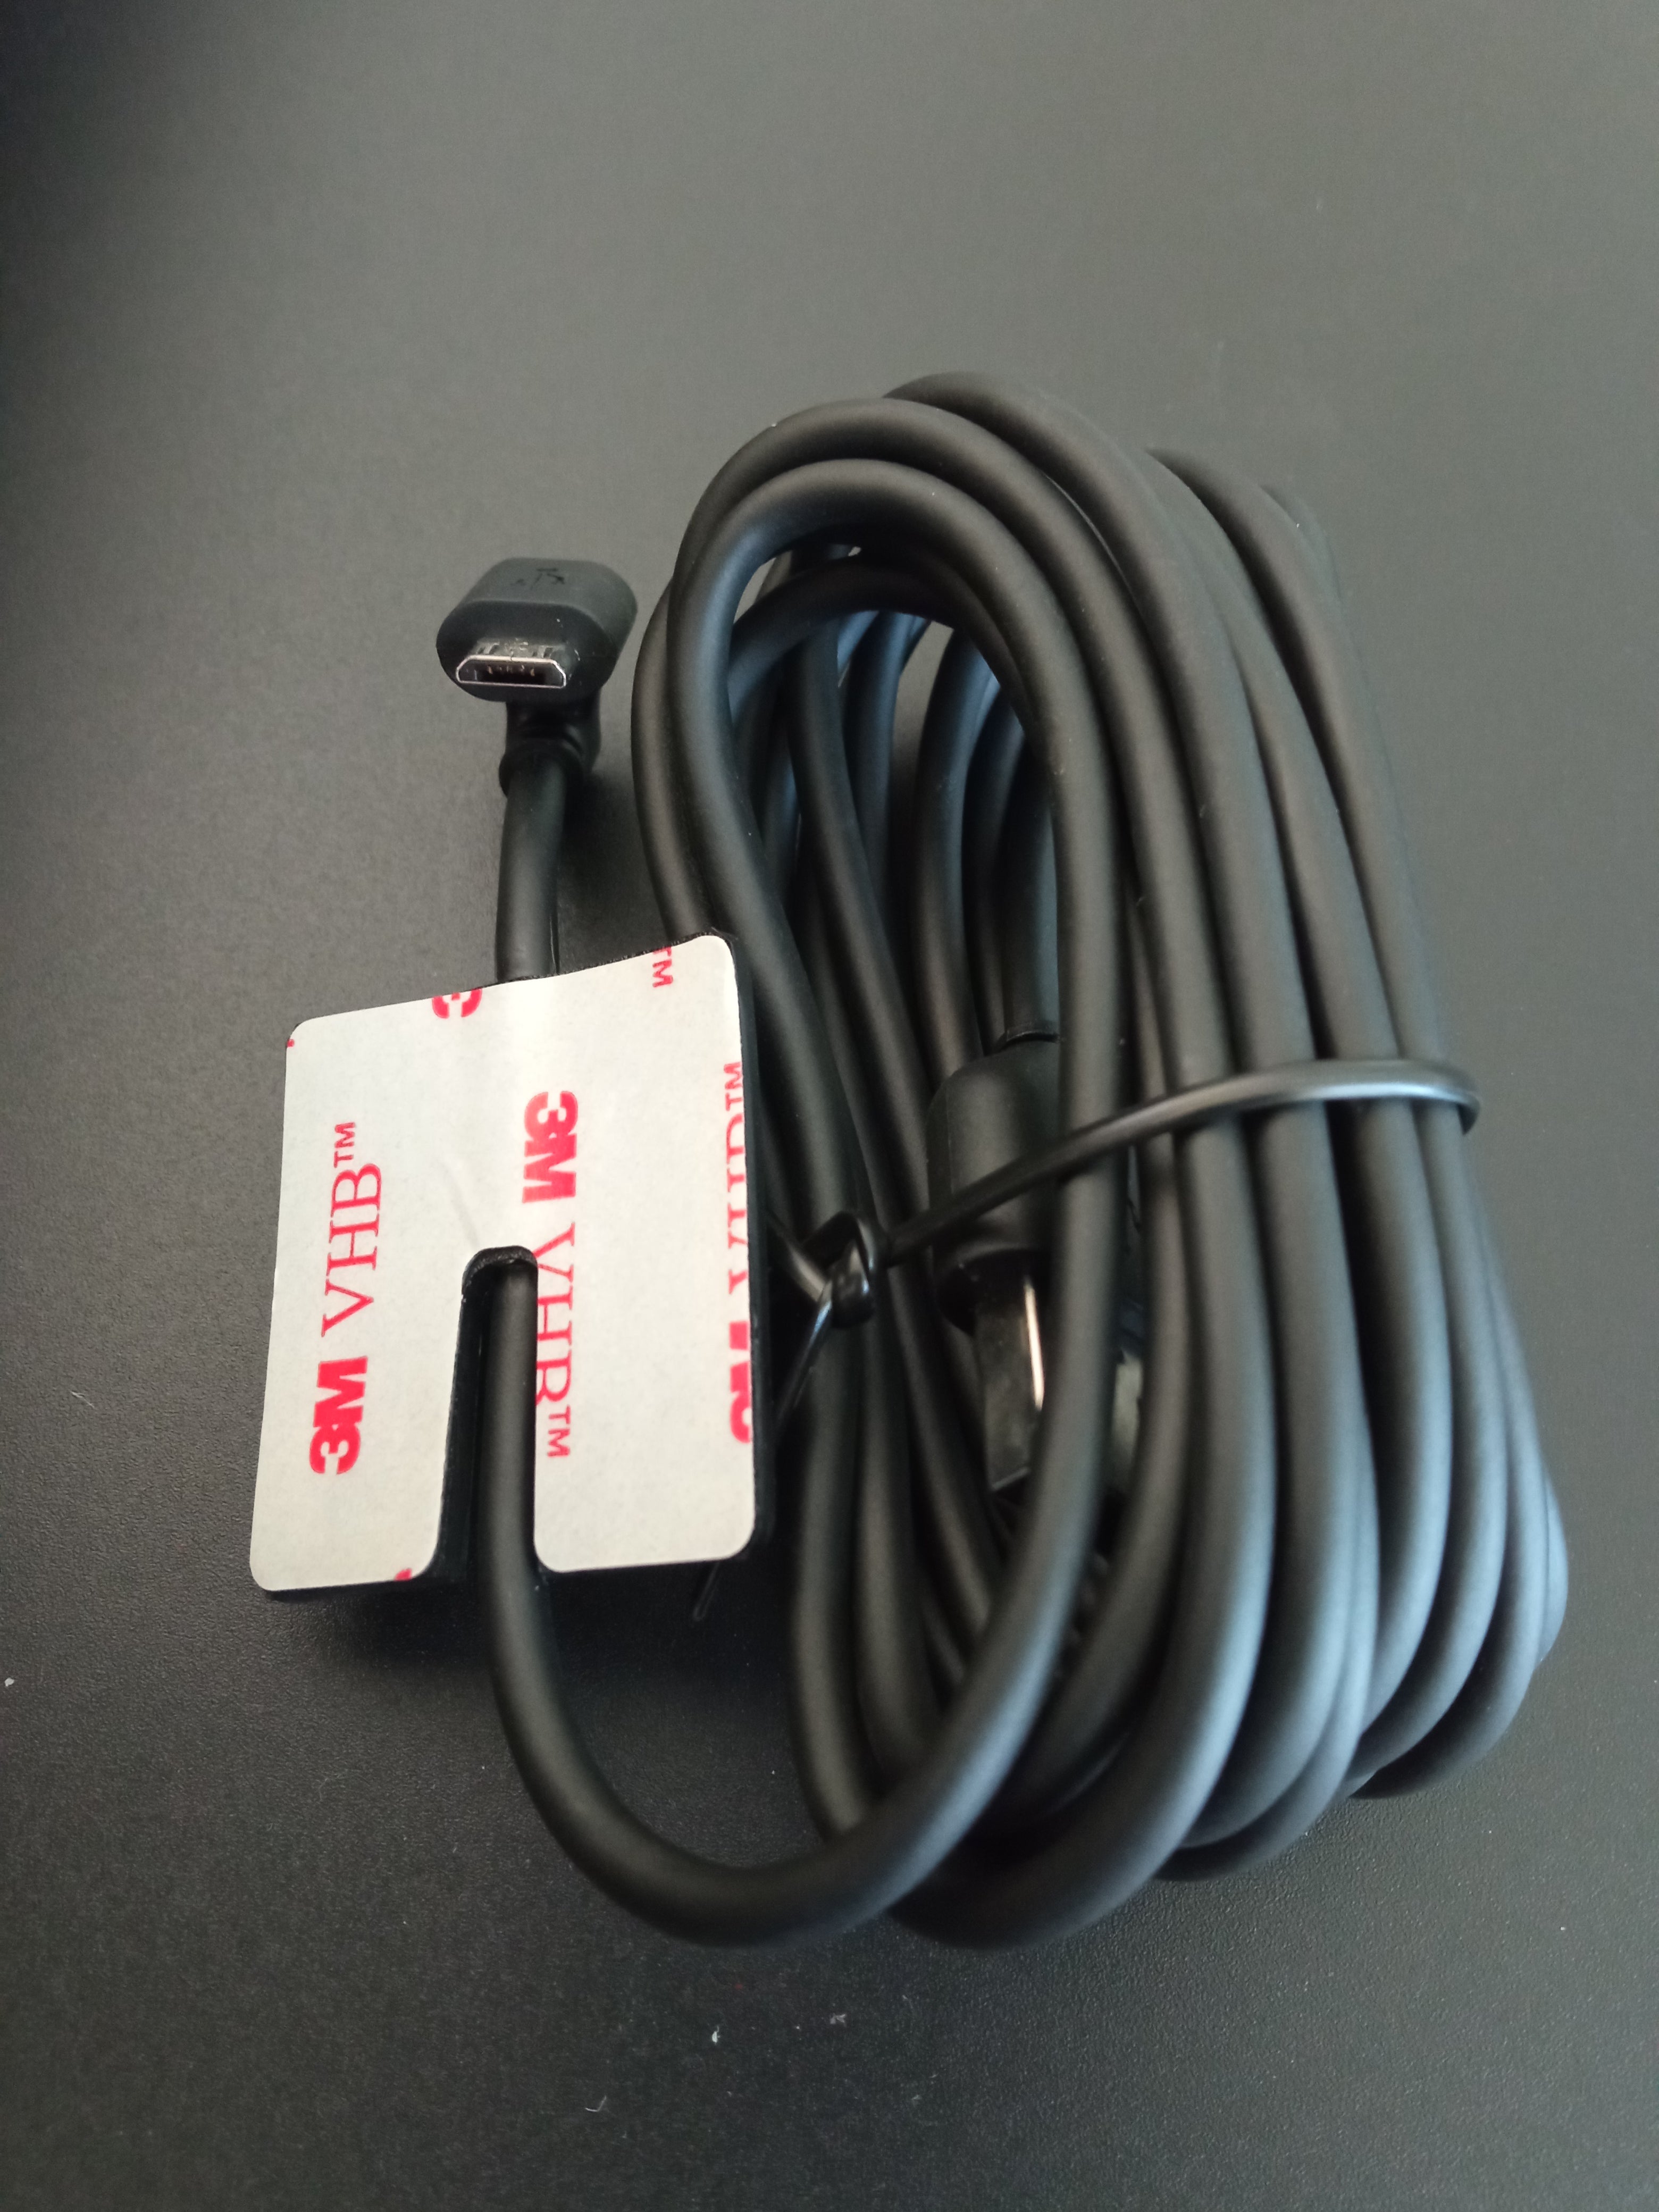 3M Android Micro USB Cable (2M) - 1 year warranty - Made in USA